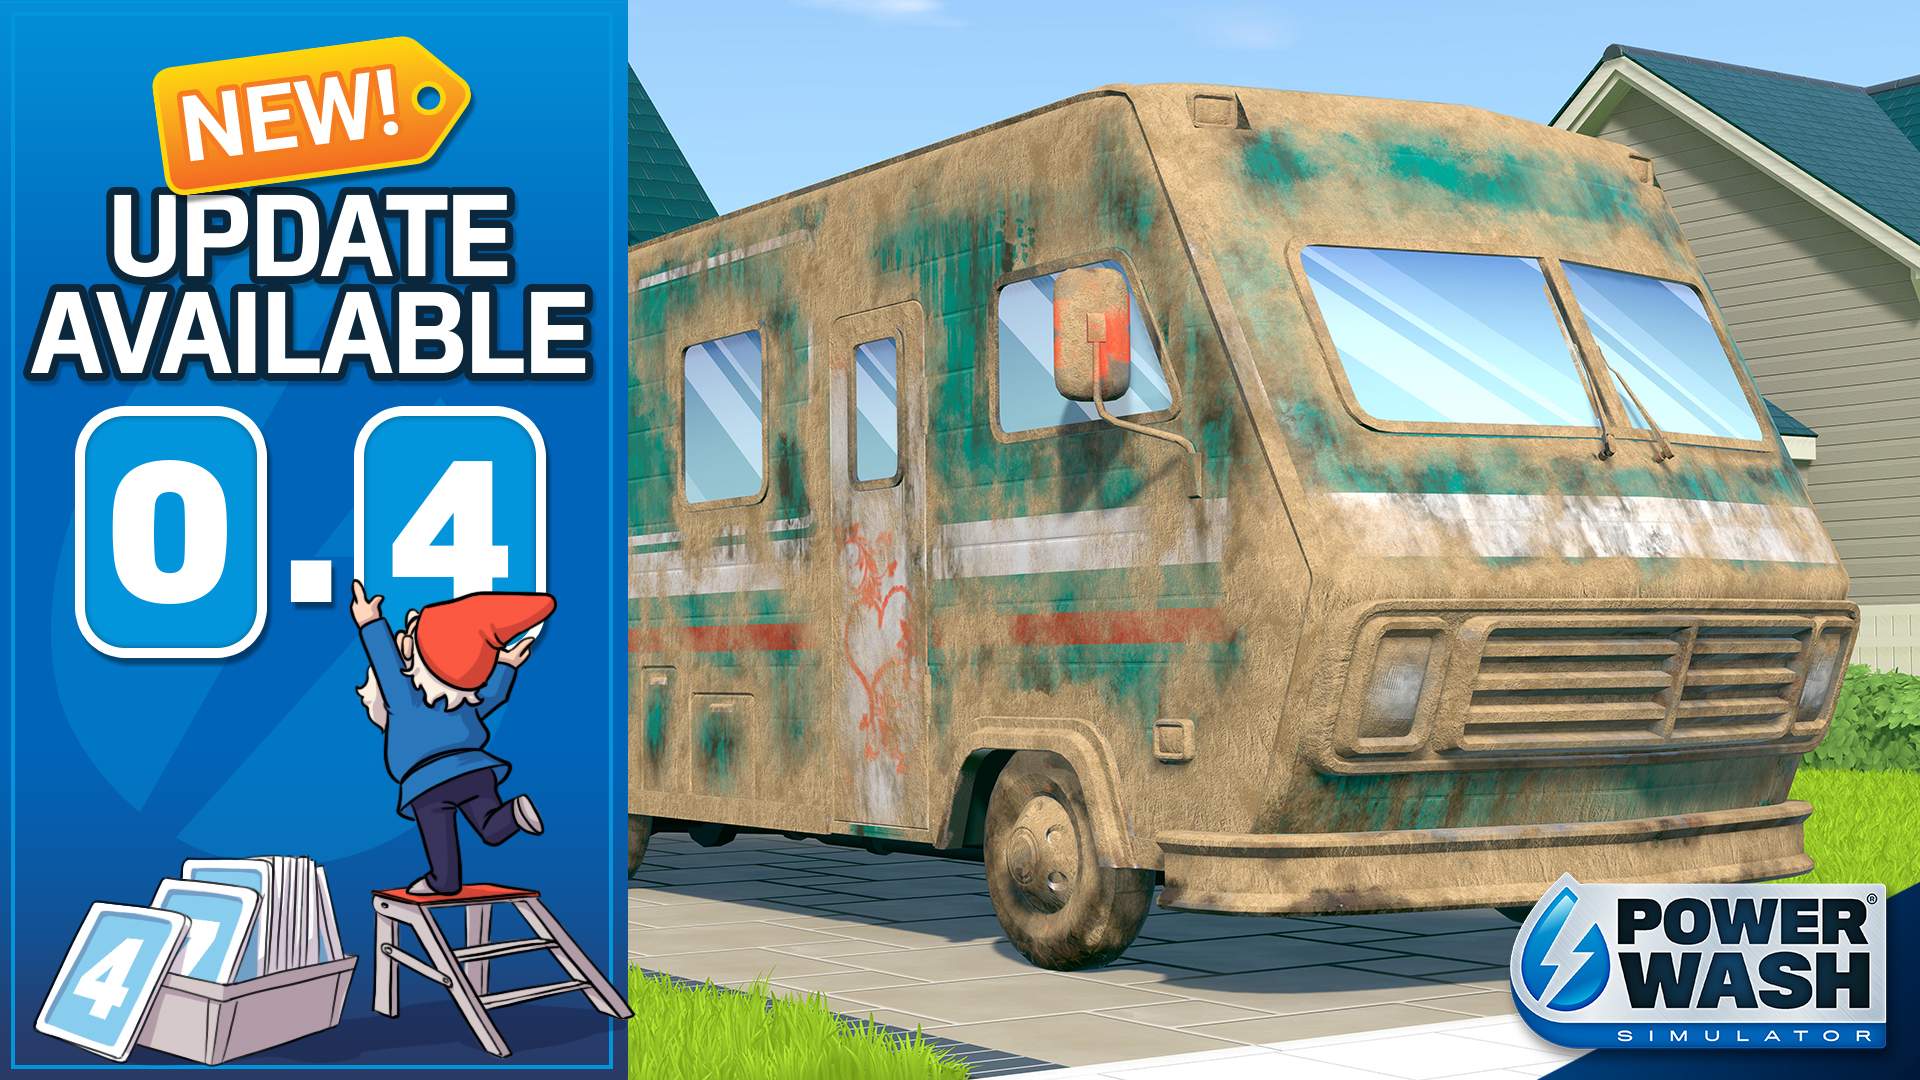 Update 0.4 Available now, a picture of a dirty RV, which is a new thing to clean in this update!